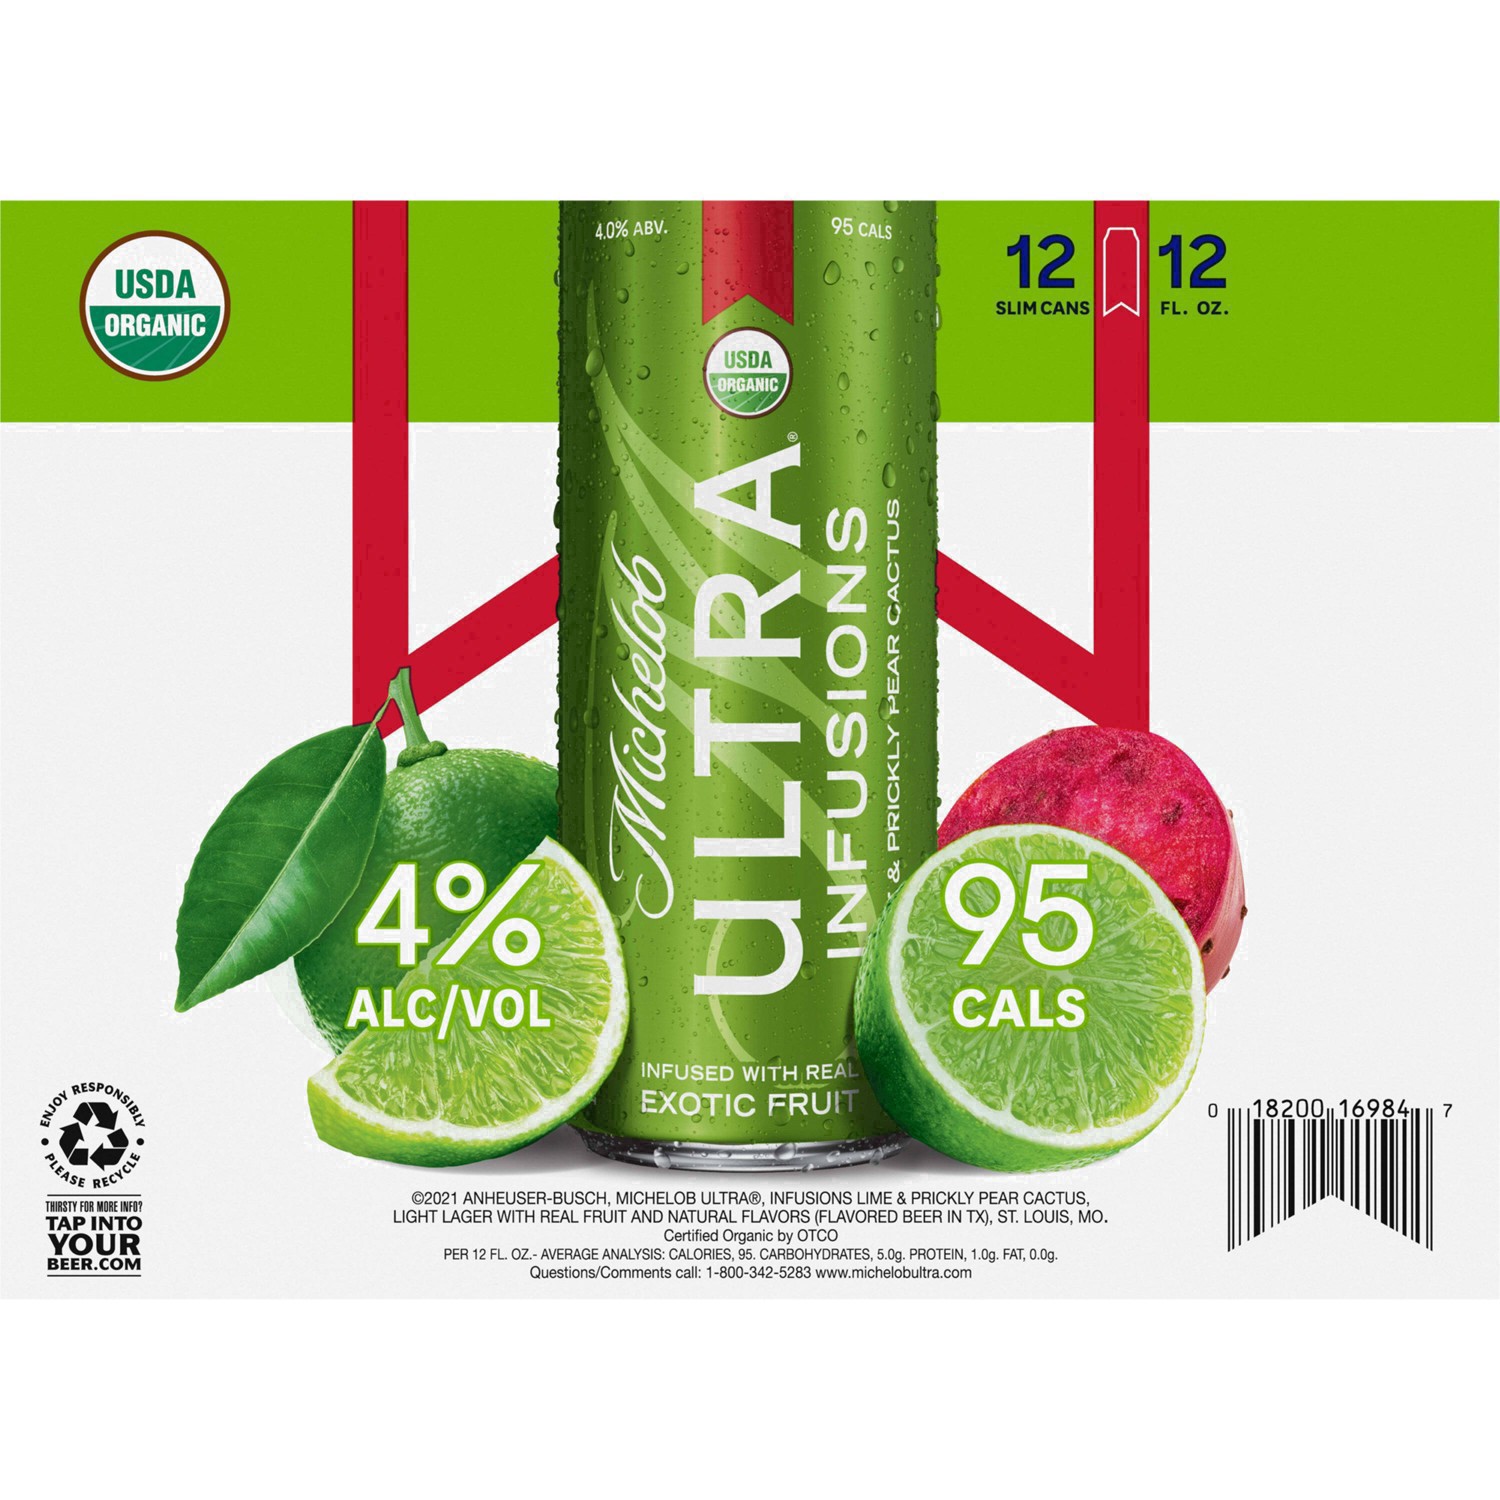 slide 23 of 99, Michelob Ultra Infusions Lime & Prickly Pear Cactus Light Beer, 4% ABV, 12 ct; 12 fl oz